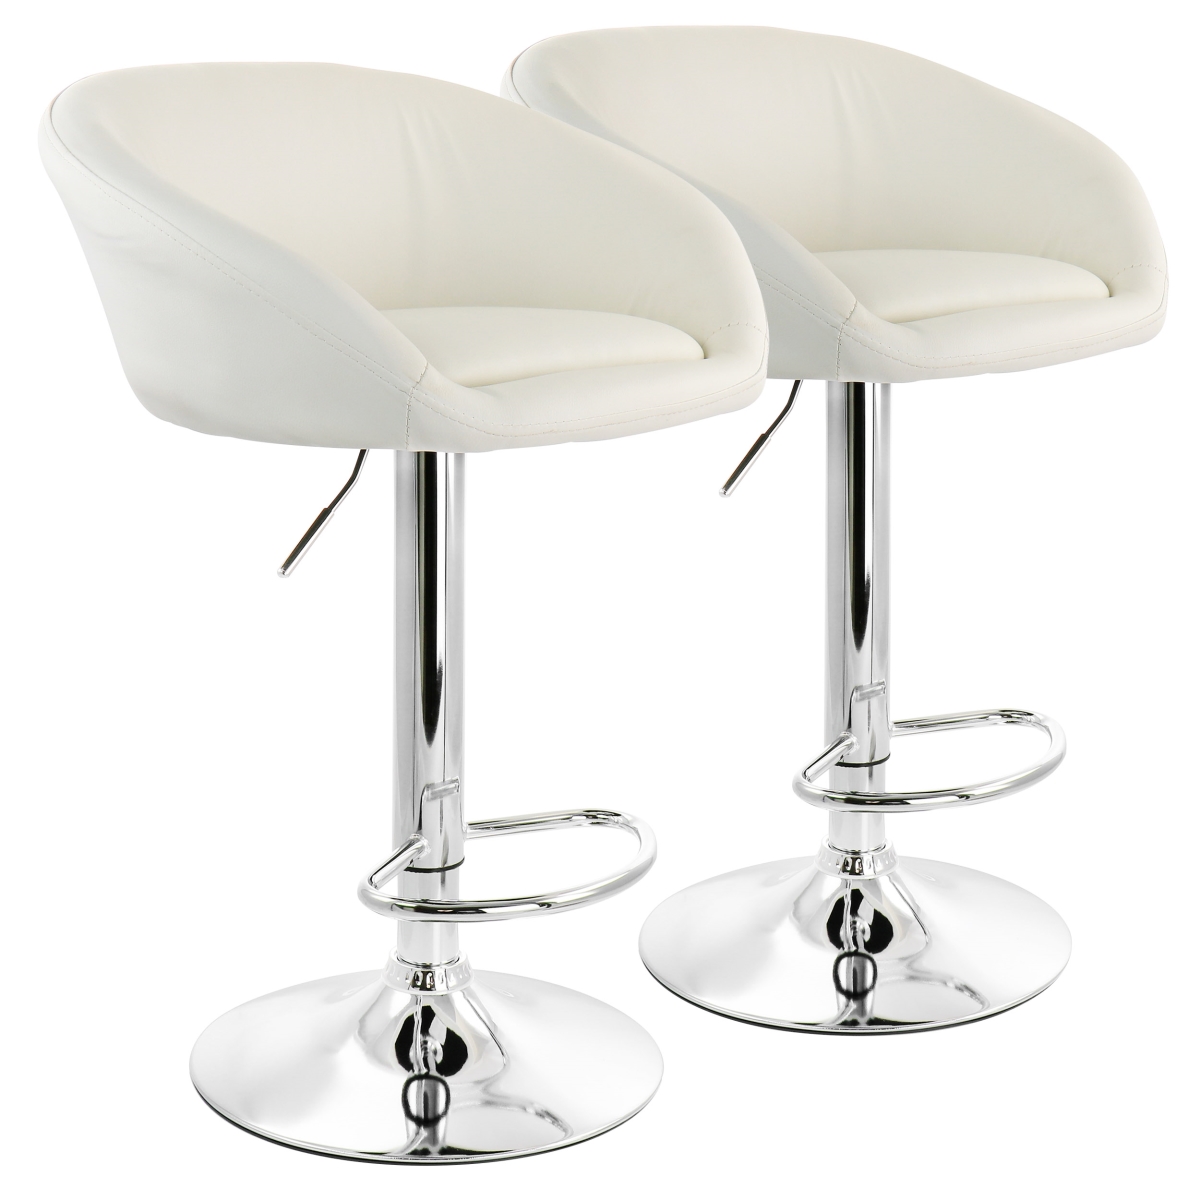 Picture of Elama ELELM-777-WHT Adjustable Faux Leather Bar Stool with Chrome Base, White - 2 Piece